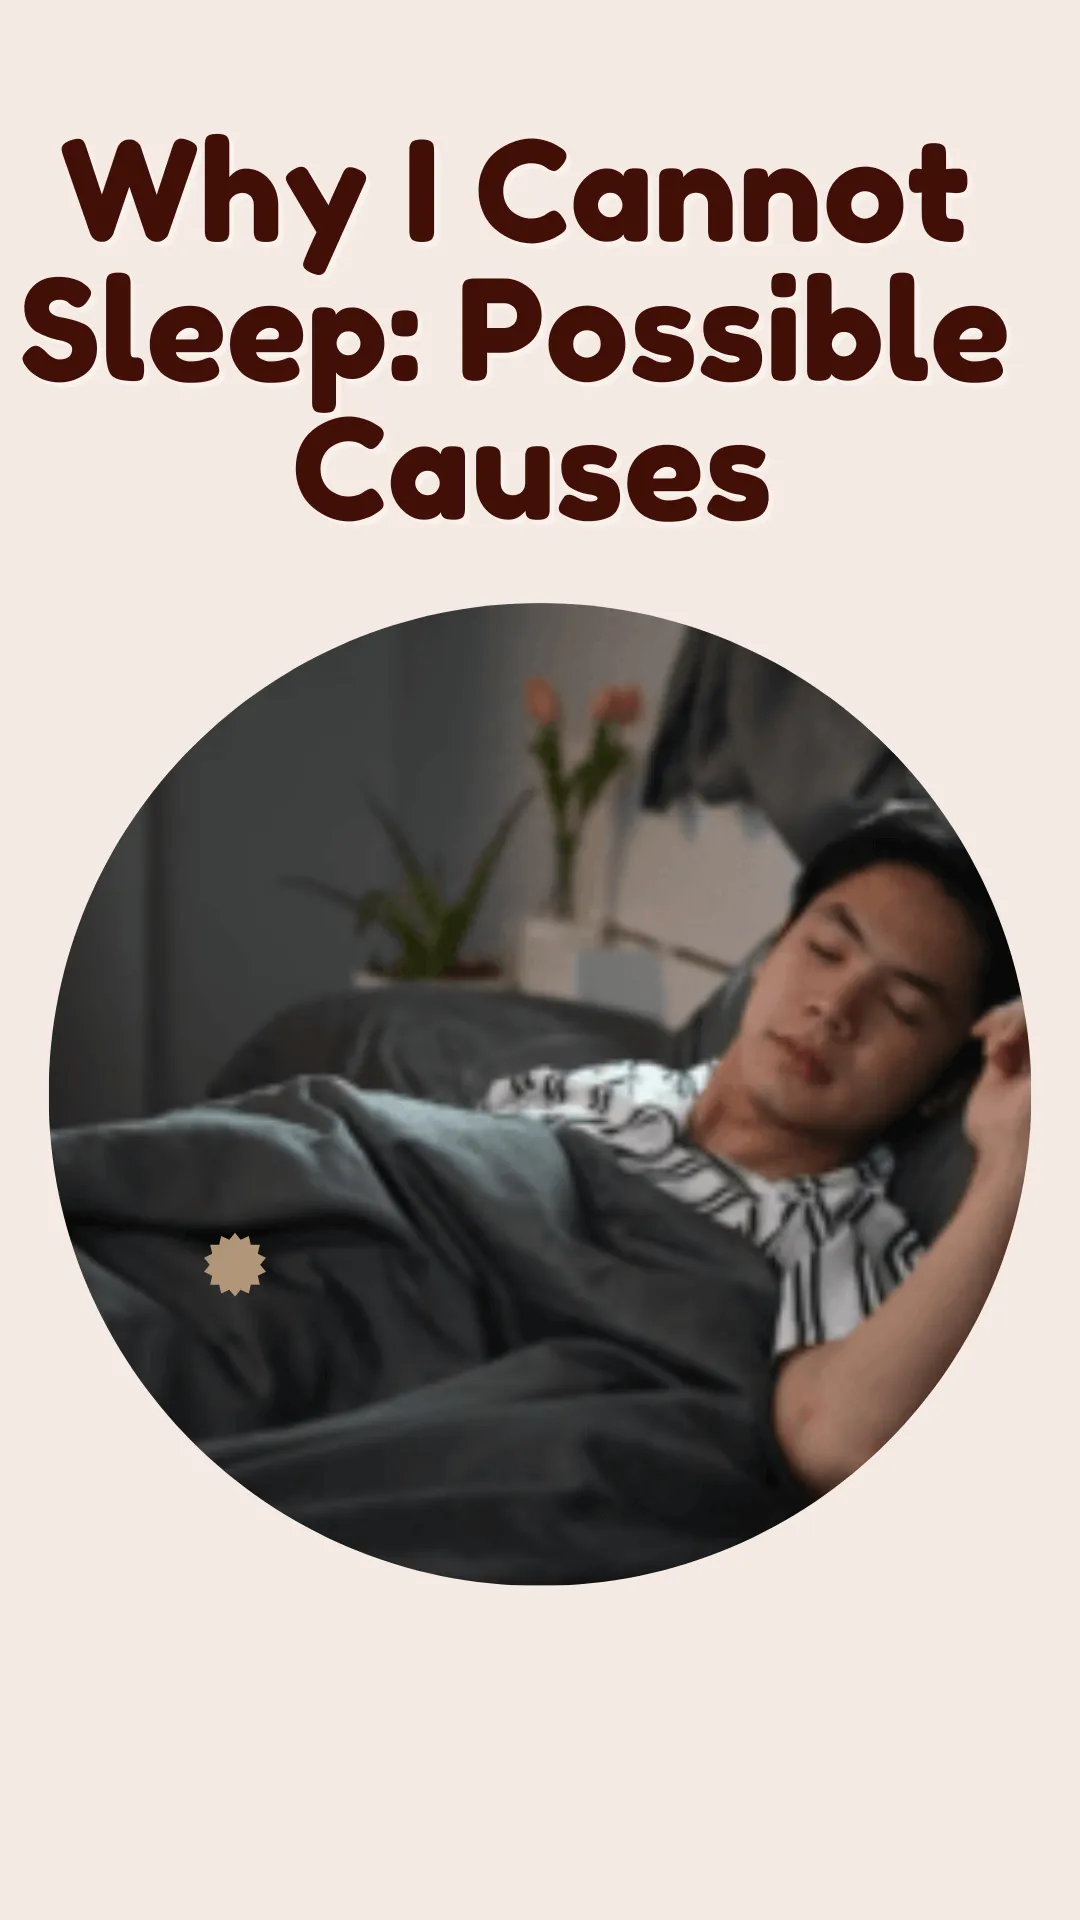 Why I Cannot Sleep: Possible Causes